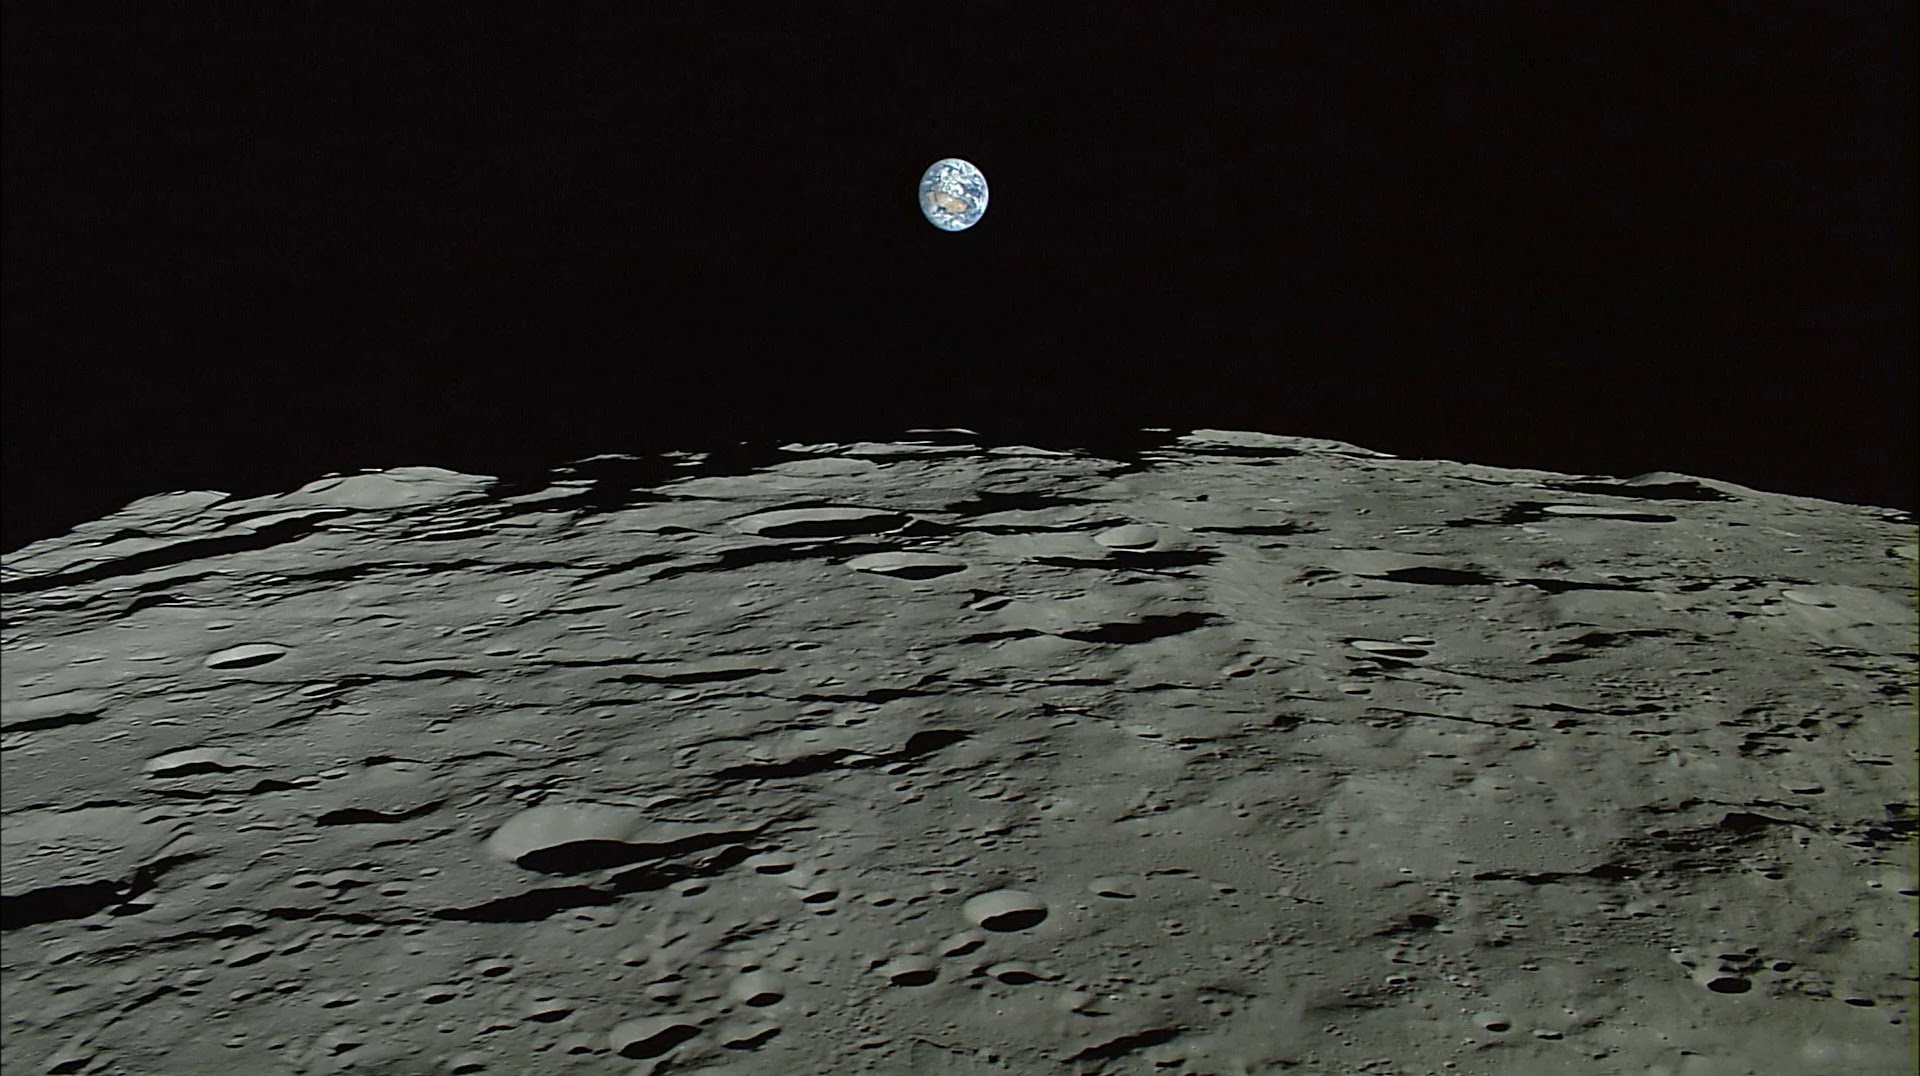 Japanese Private Lunar Probe Captures Stunning Image of Moon from Orbit"